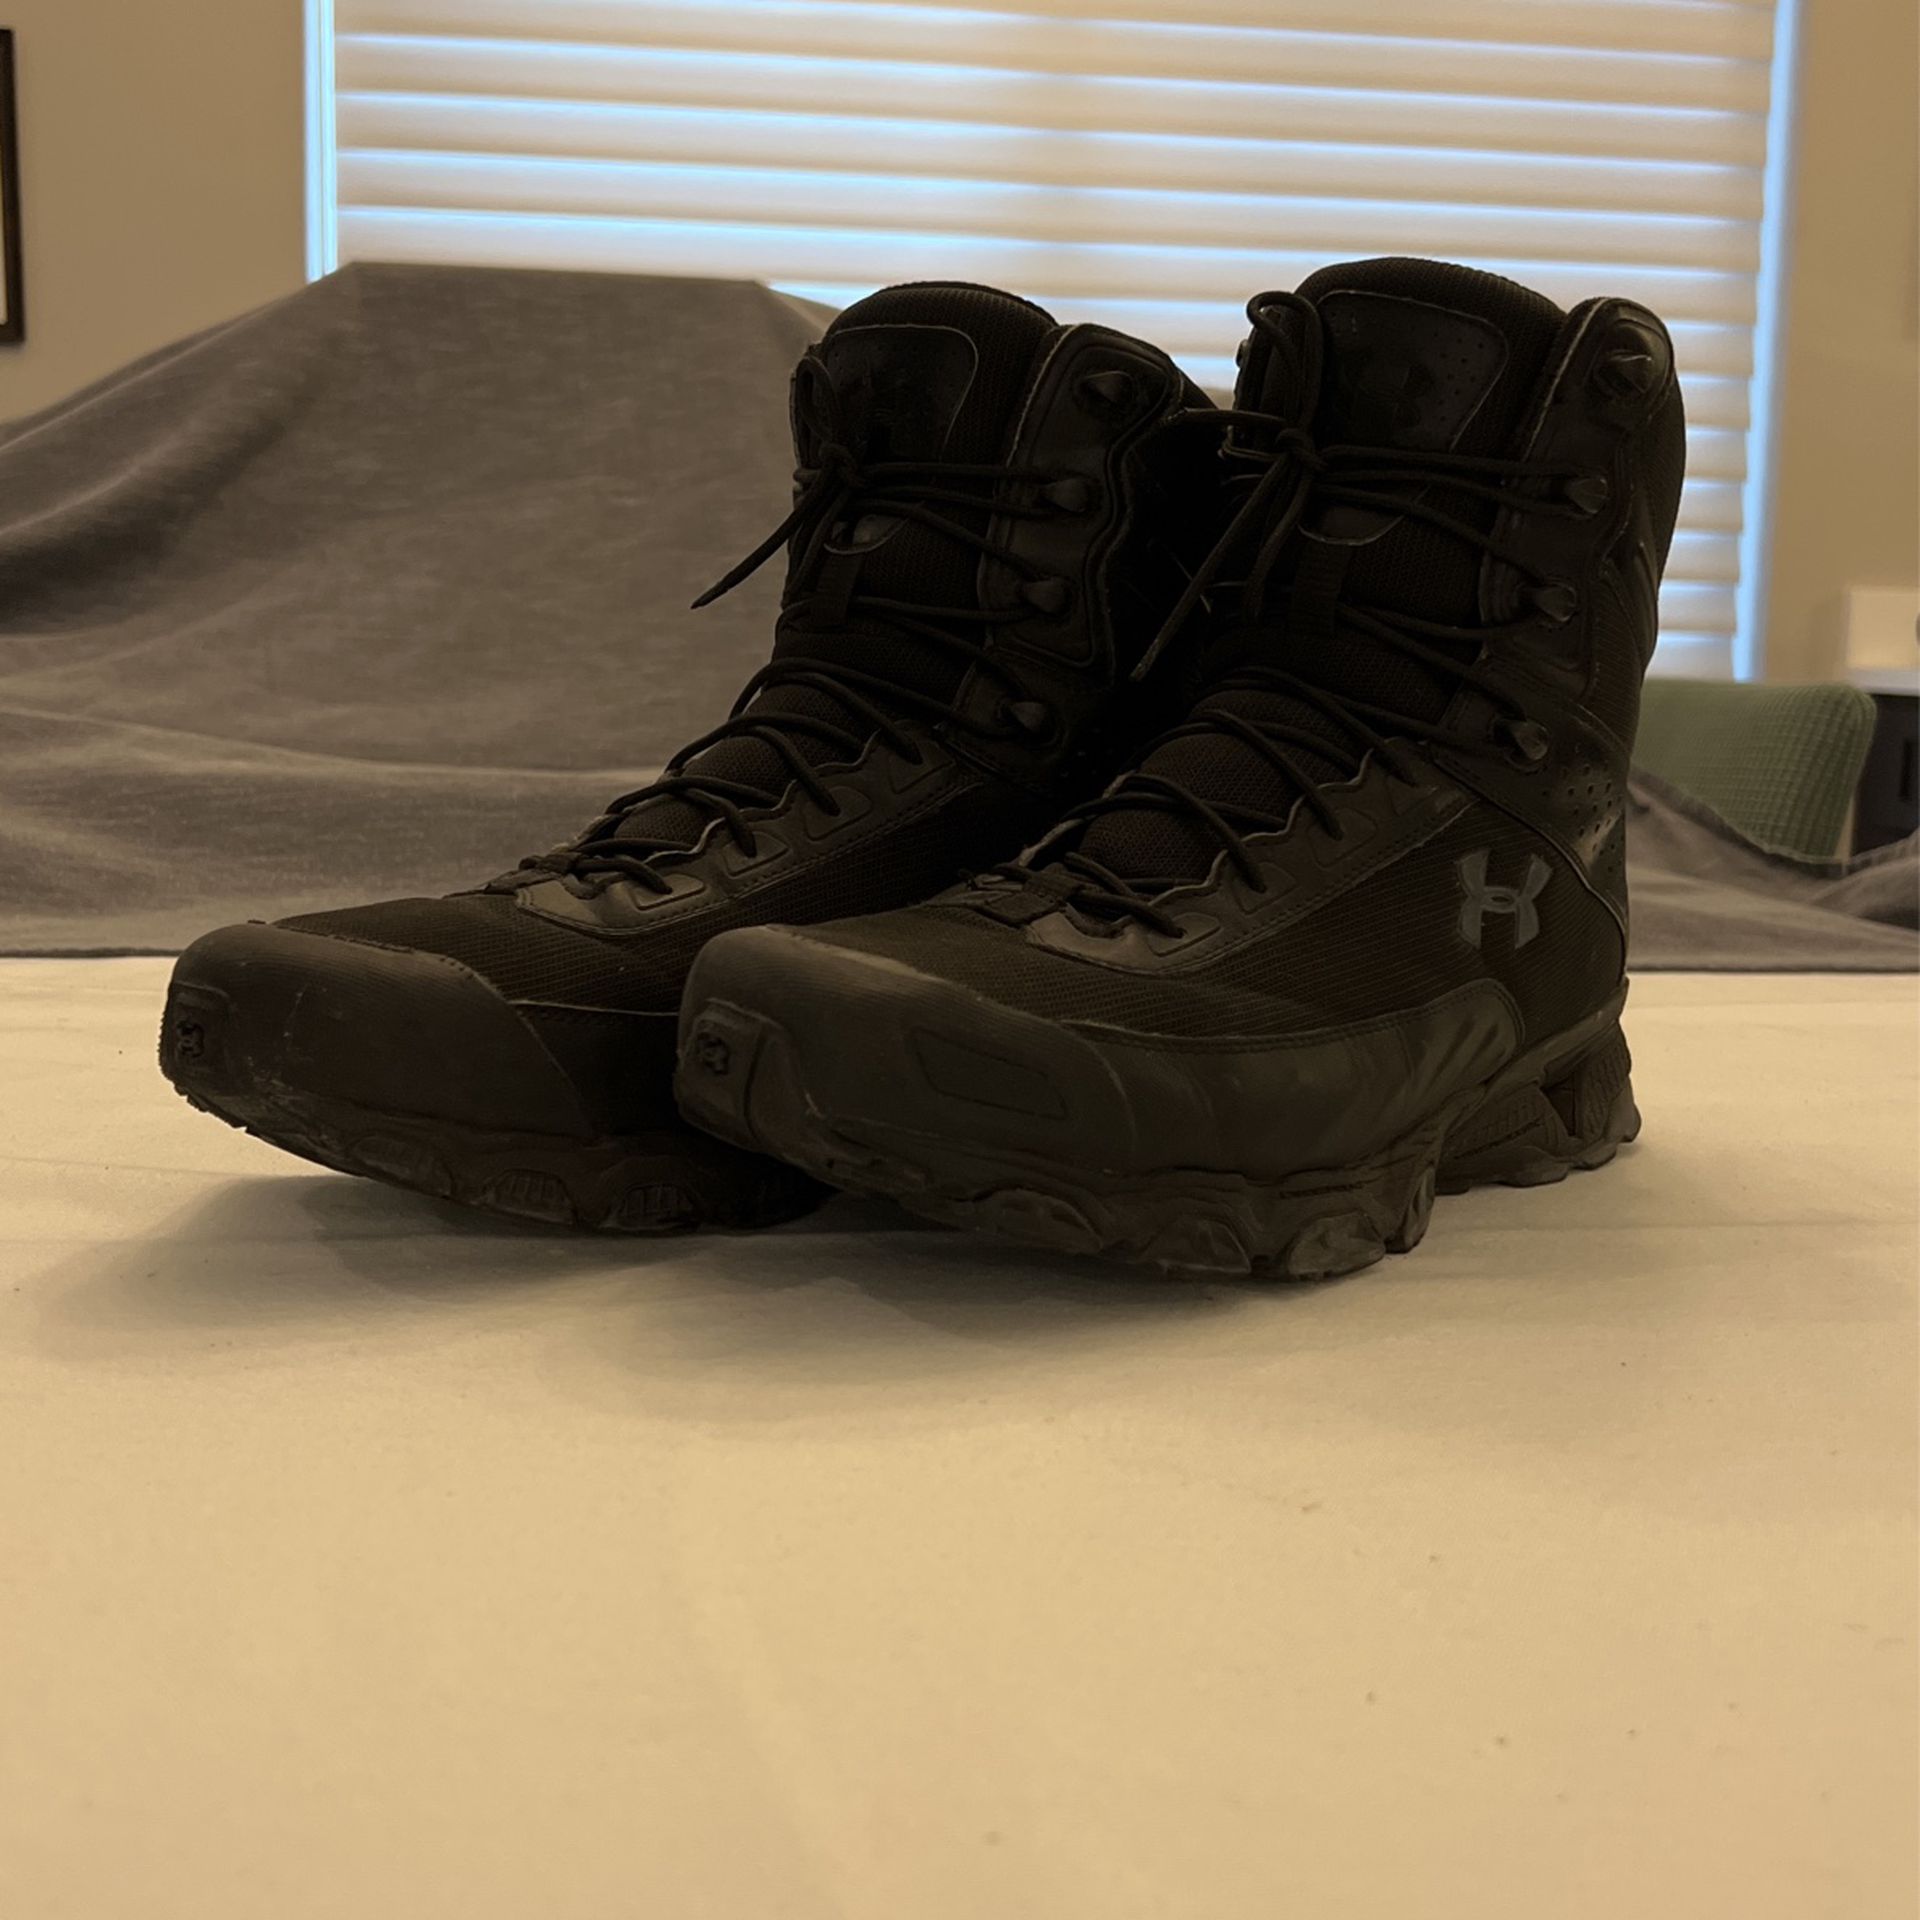 Under Armor Mens Boots